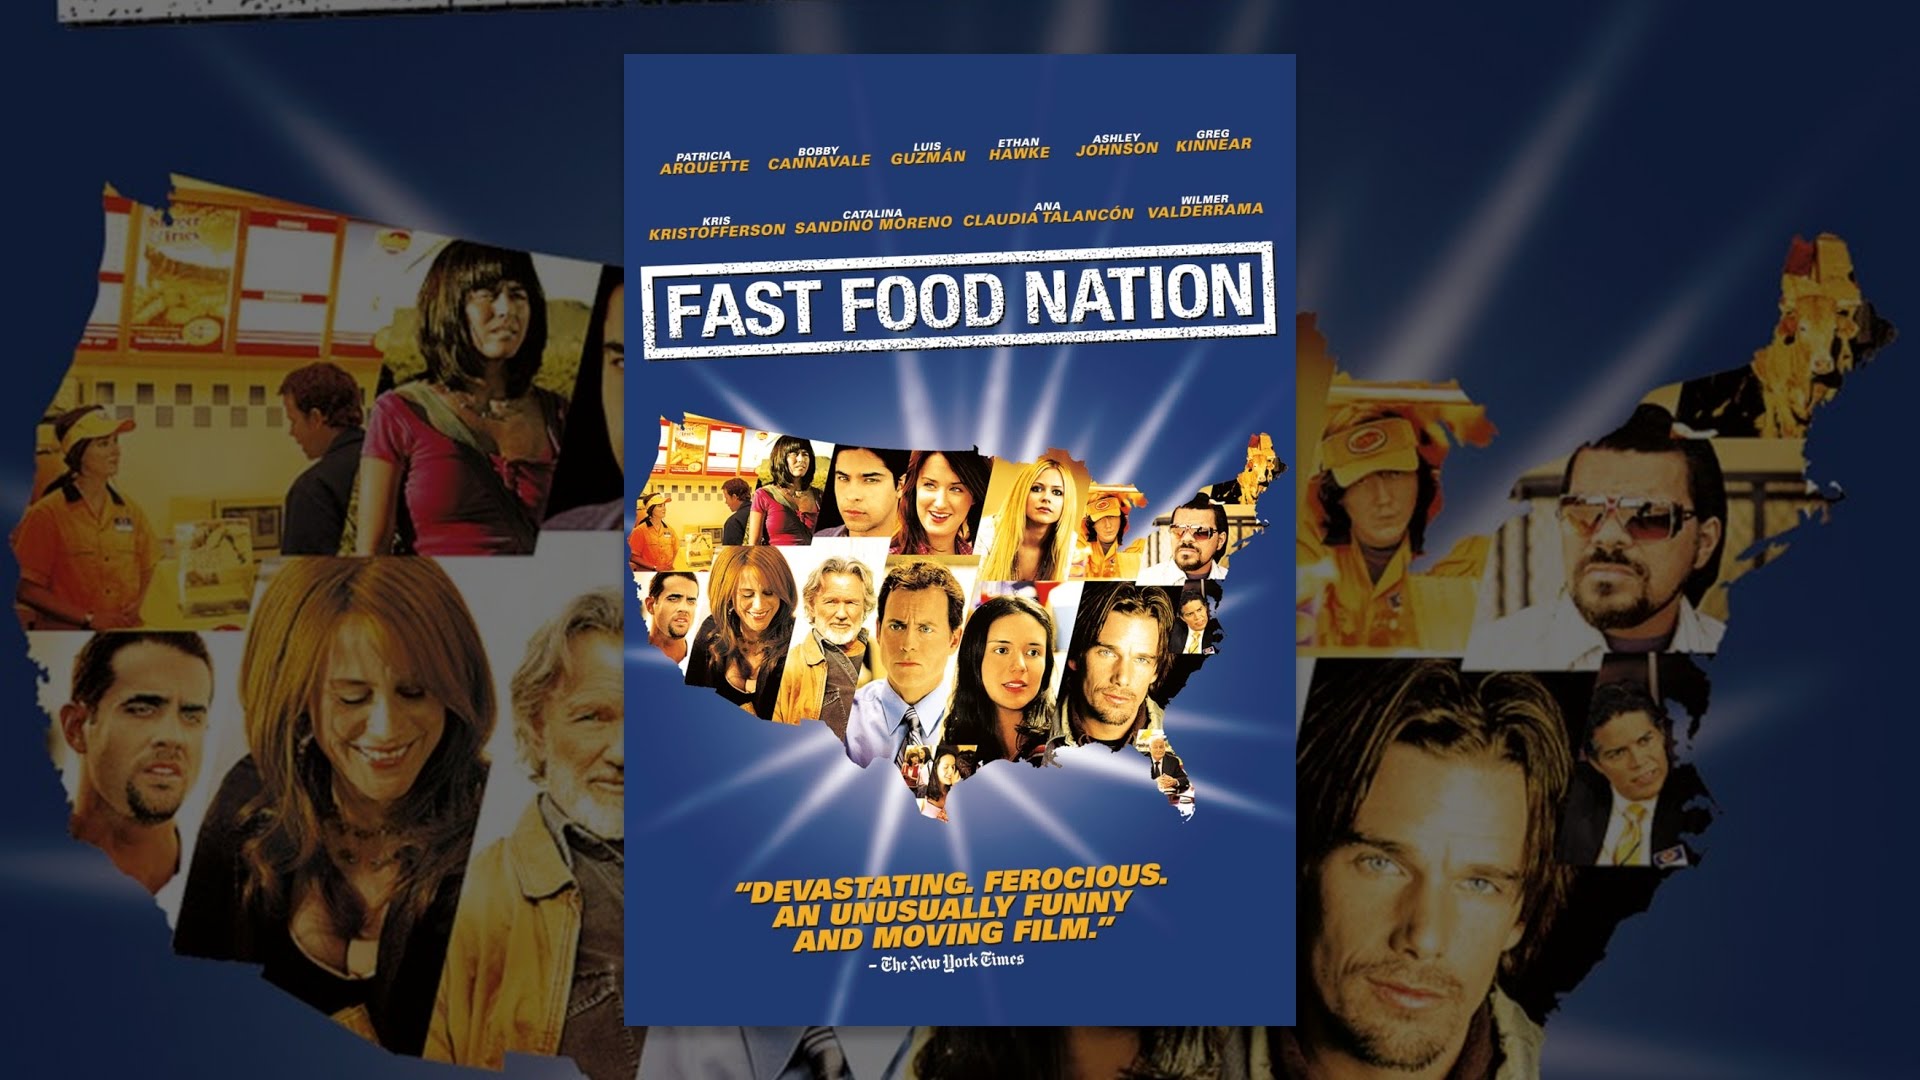 Fast Food Nation Death in the Fast